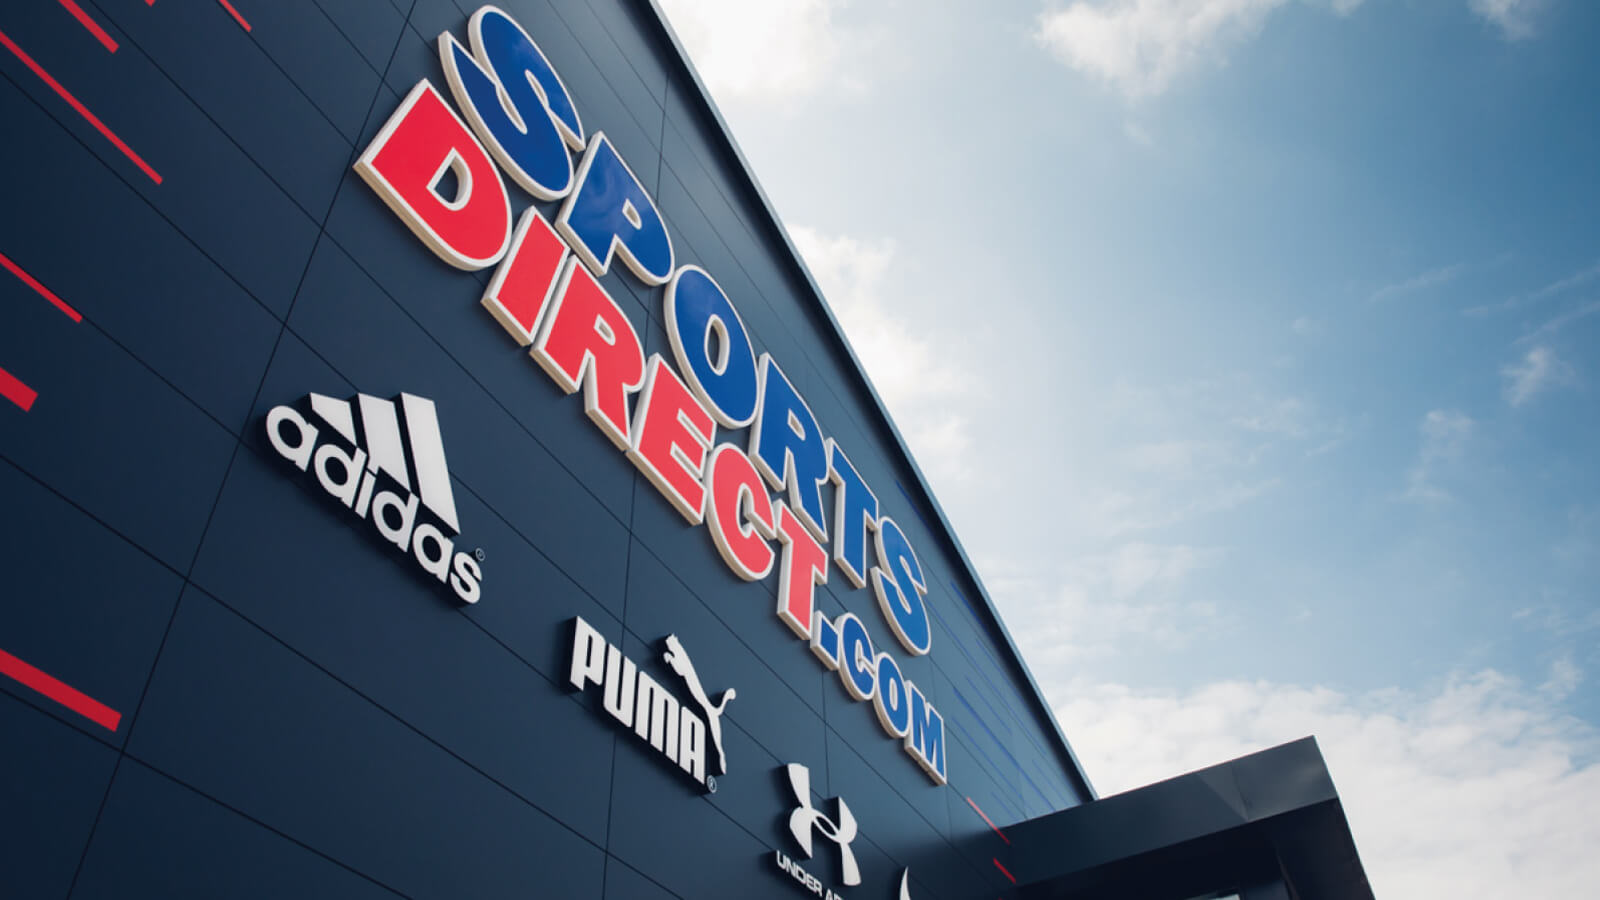 Sports Direct warehouse shop front including logo and customer logos